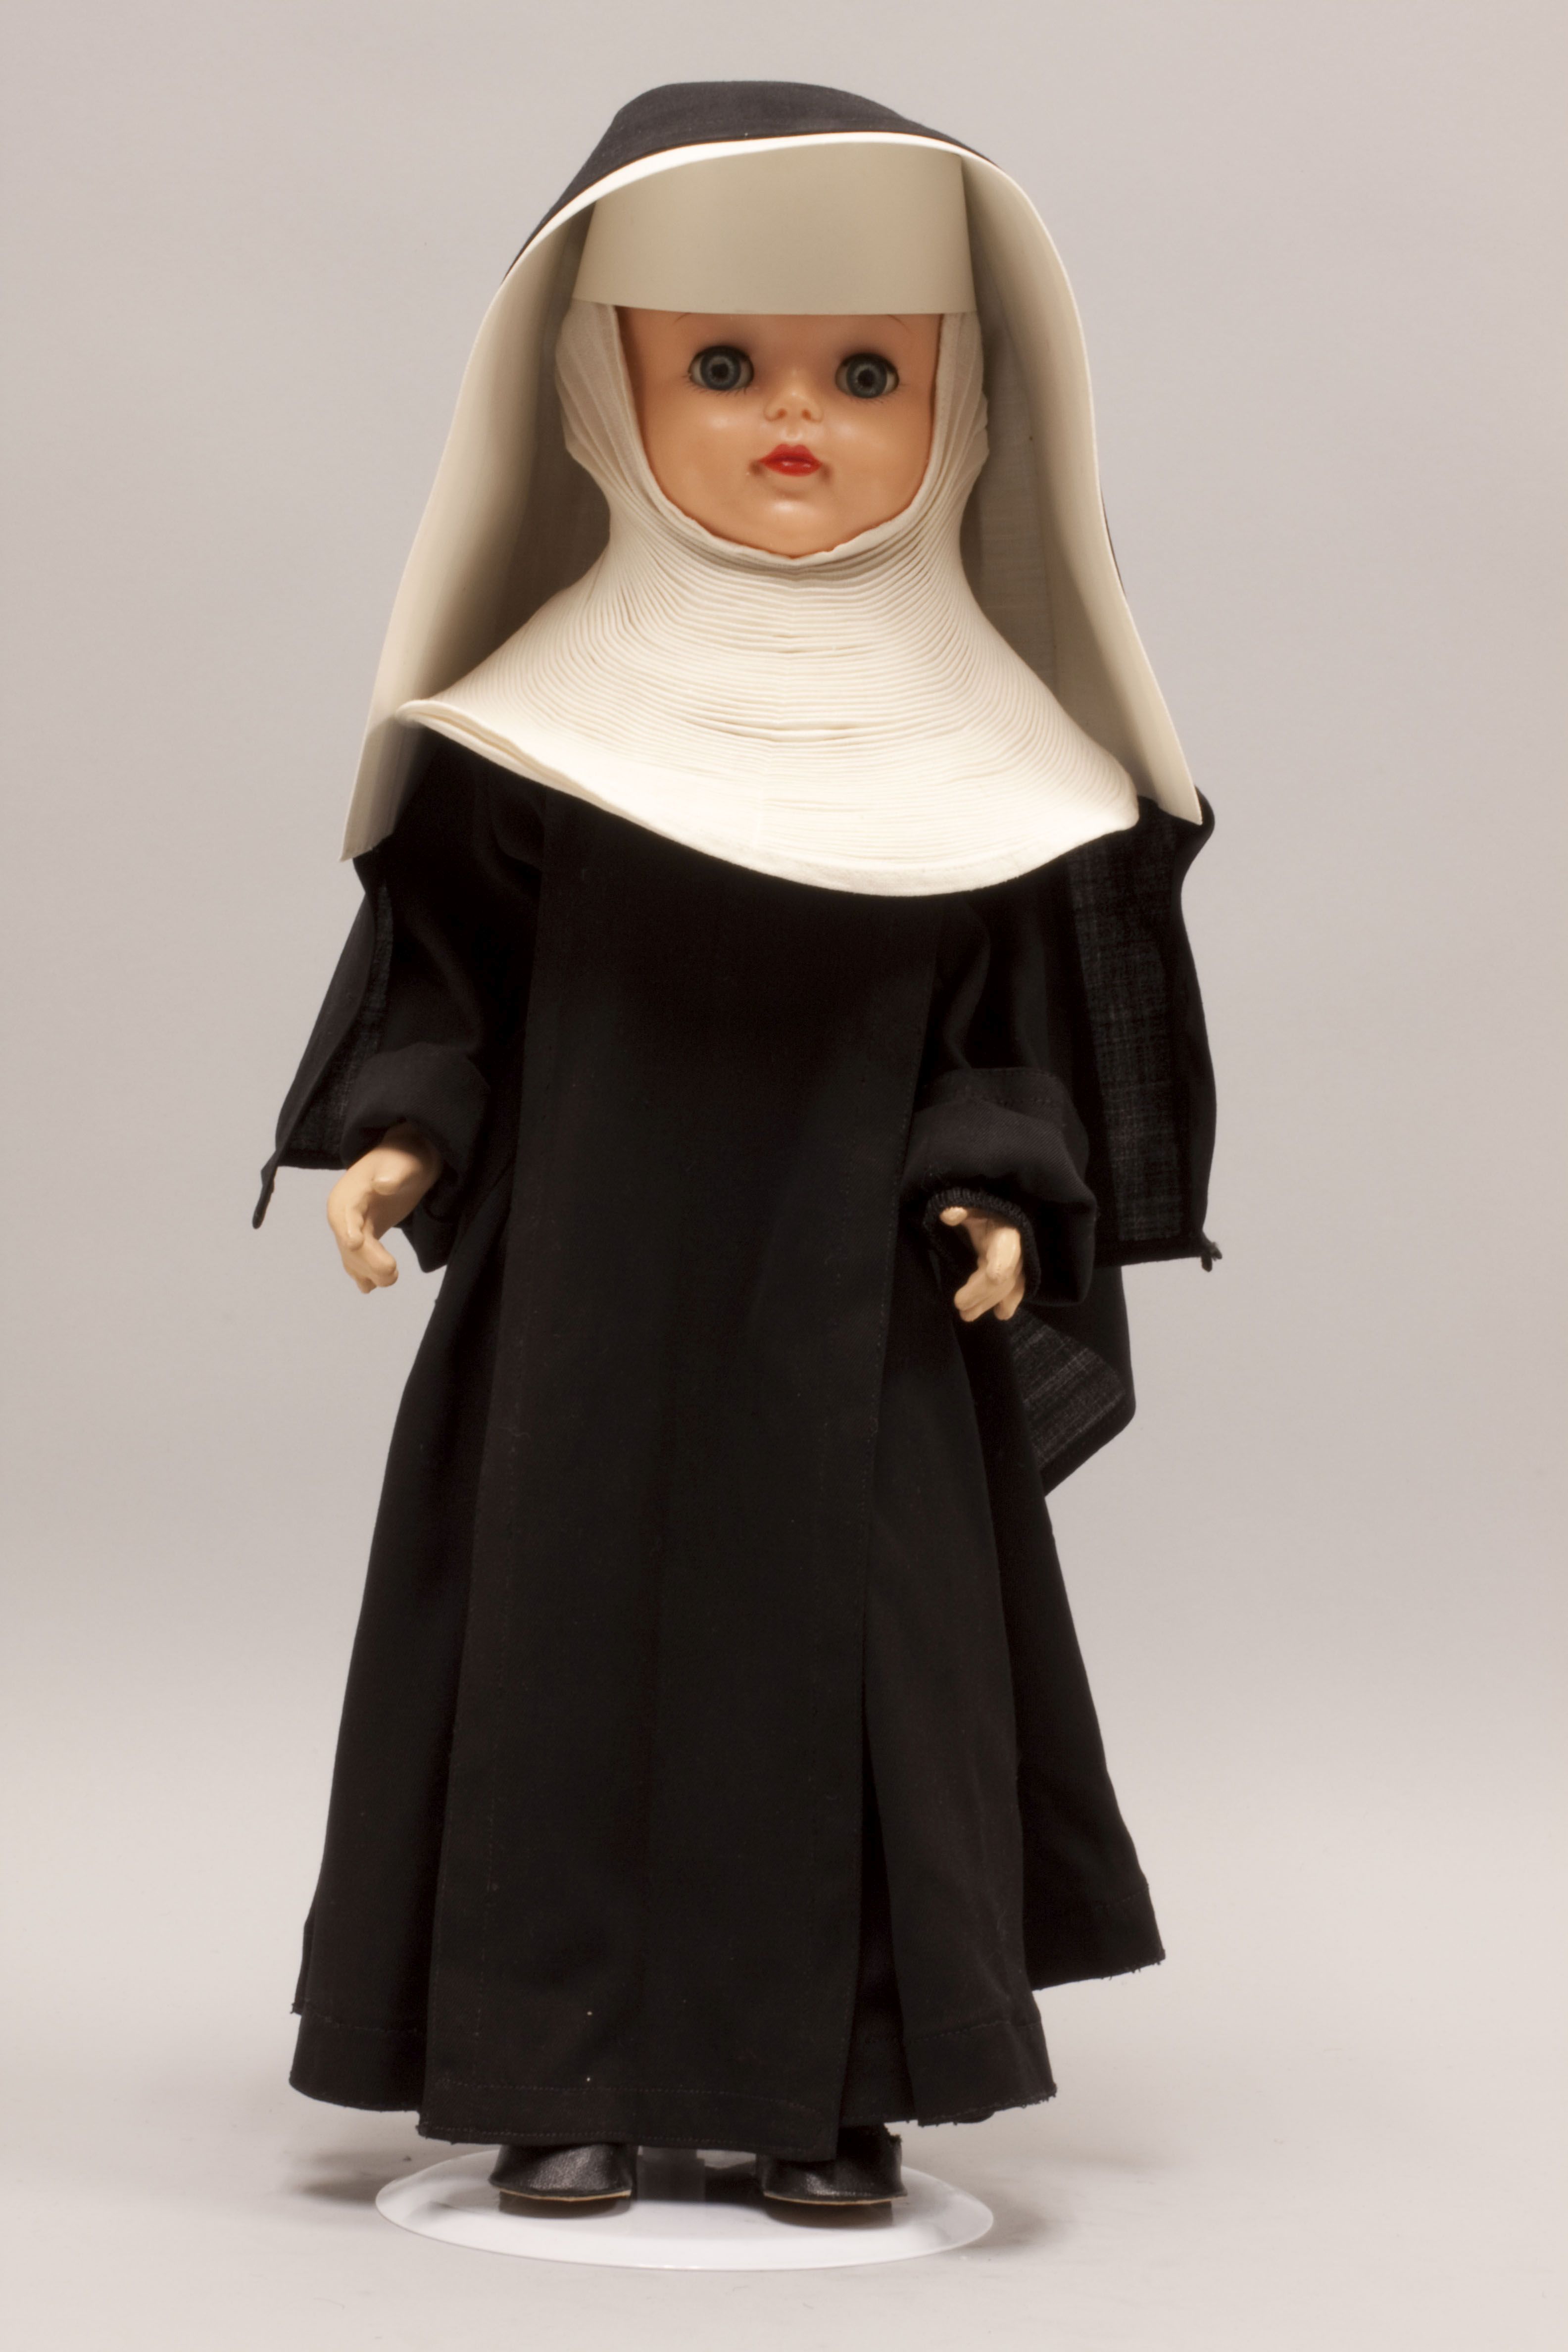 ?Doll with Habit worn by an Unidentified Religious Order?, U.S. Catholic Special Collections, Catholic Sisters International, 20th c. 